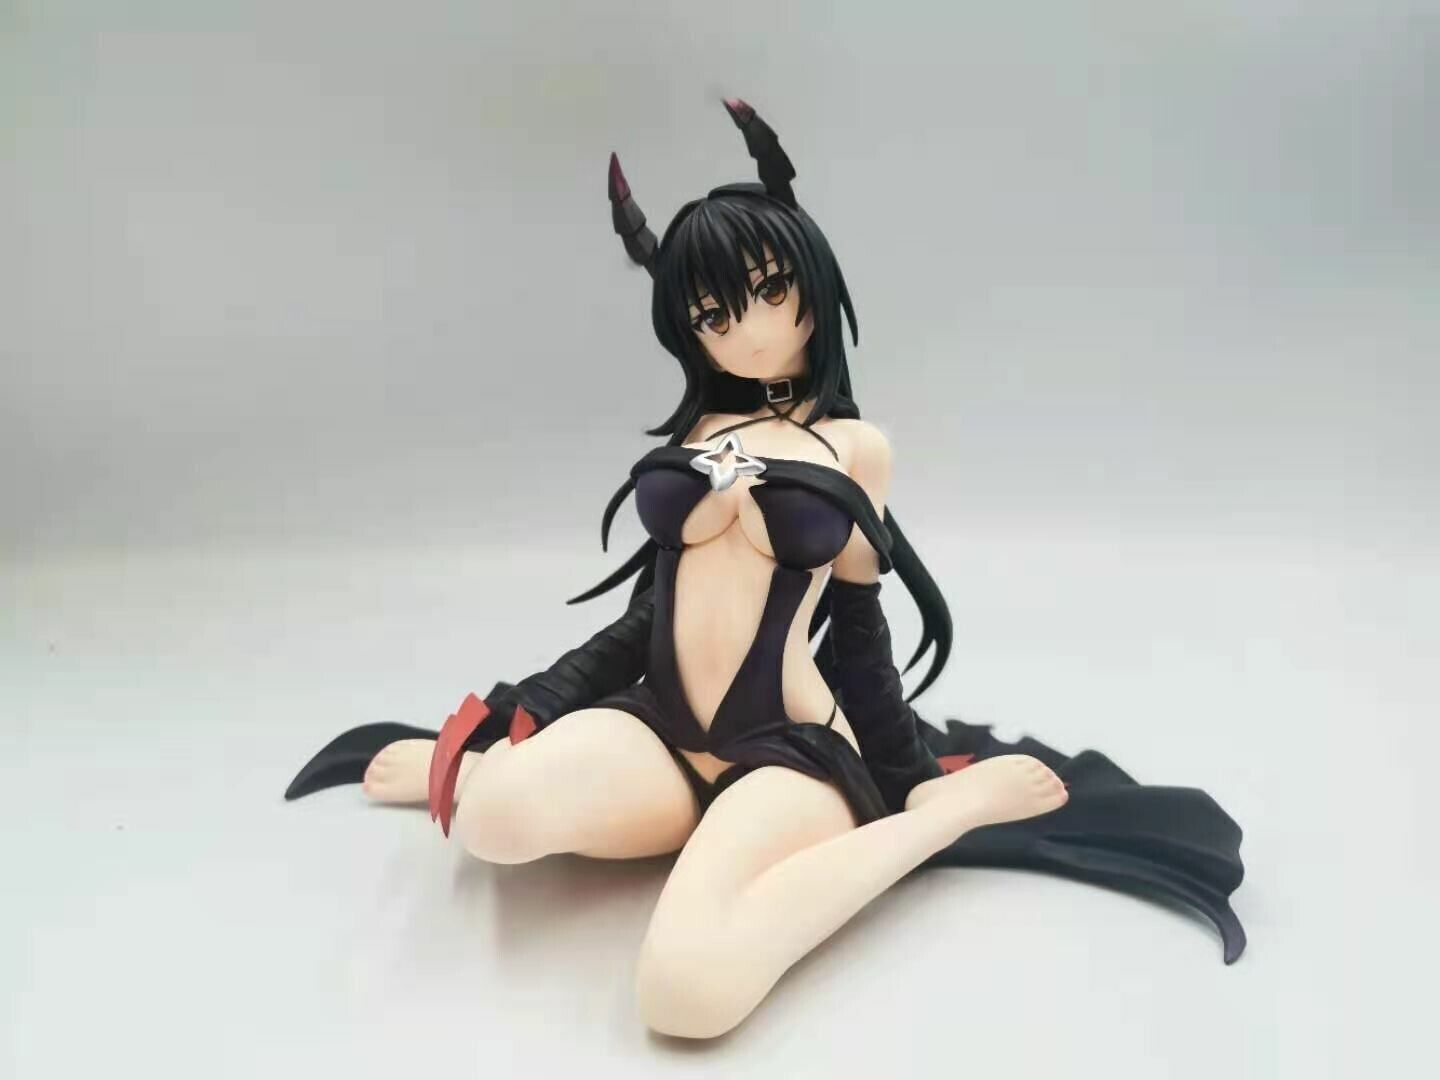 New 16CM Anime Sexy Devil Girl Anime Characters Figures Pvc Toy Gift No Box